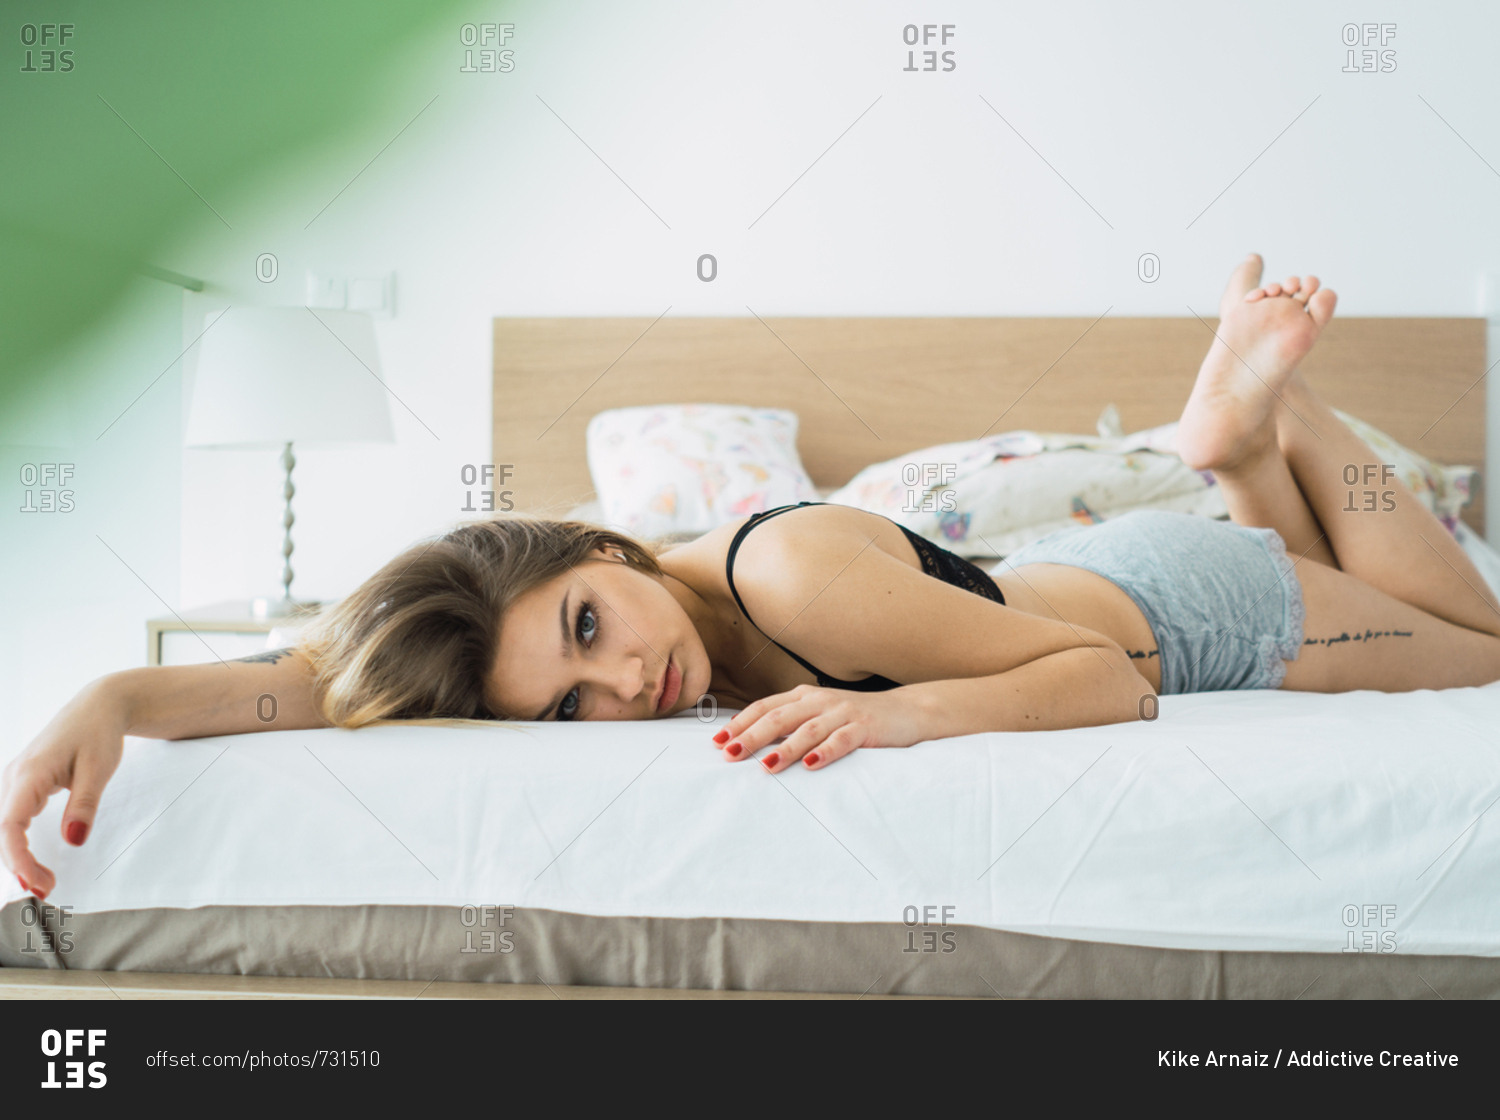 Woman wearing a bra lying on a bed stock photo - OFFSET